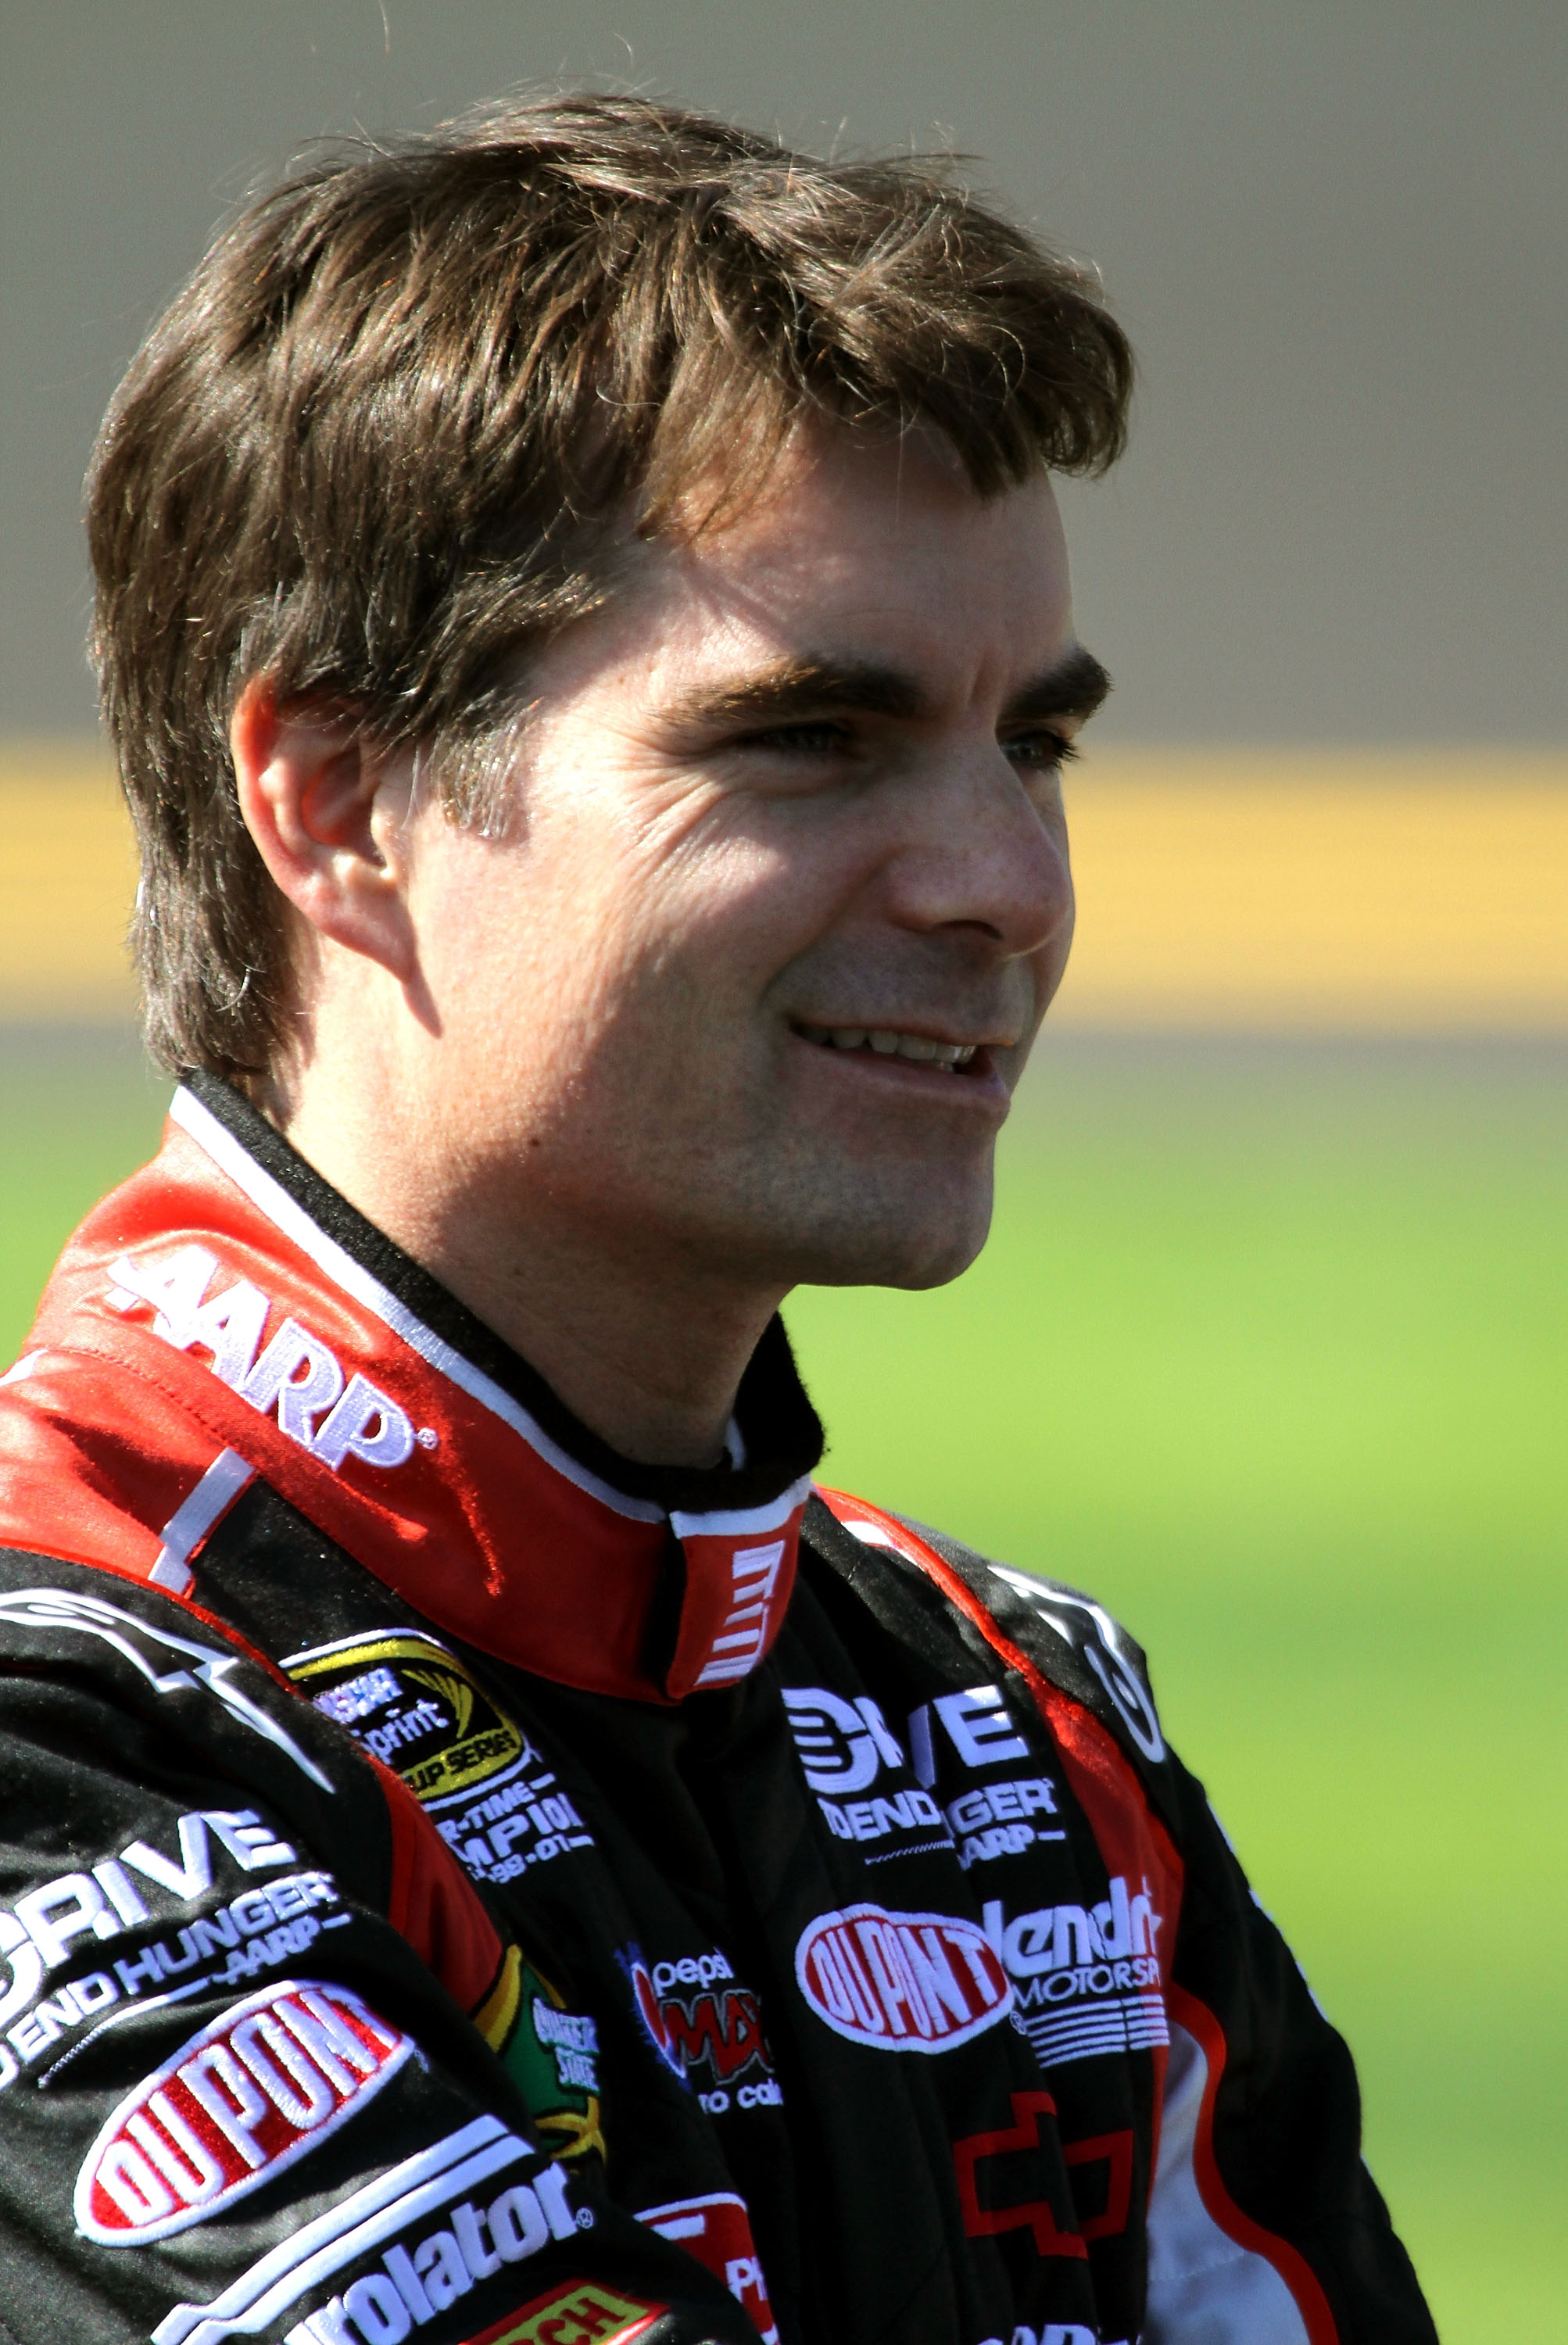 DAYTONA BEACH, FL - FEBRUARY 13:  Jeff Gordon, driver of the #24 Drive to End Hunger Chevrolet, stands on the grid during qualifying for the NASCAR Sprint Cup Series Daytona 500 at Daytona International Speedway on February 13, 2011 in Daytona Beach, Flor